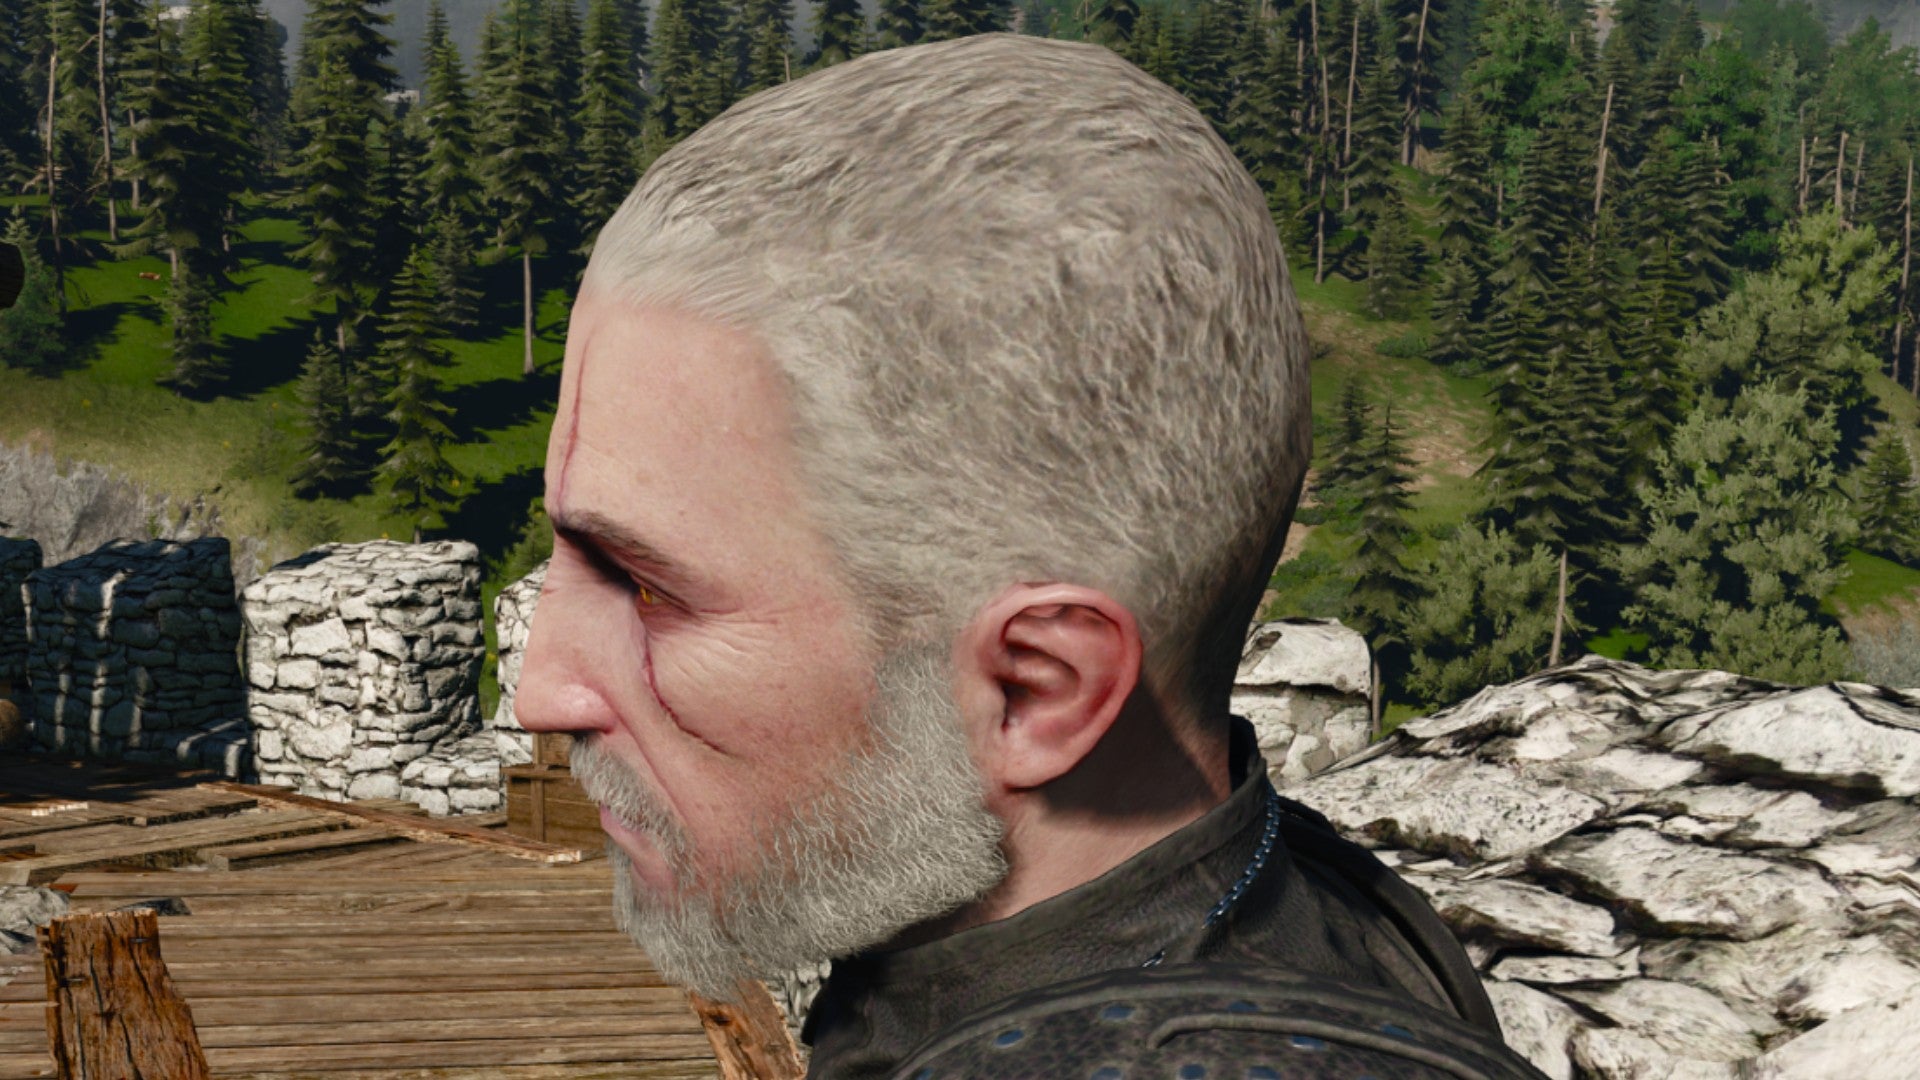 Witcher 3 Haircuts What All Haircuts Hairstyles Beards Look Like